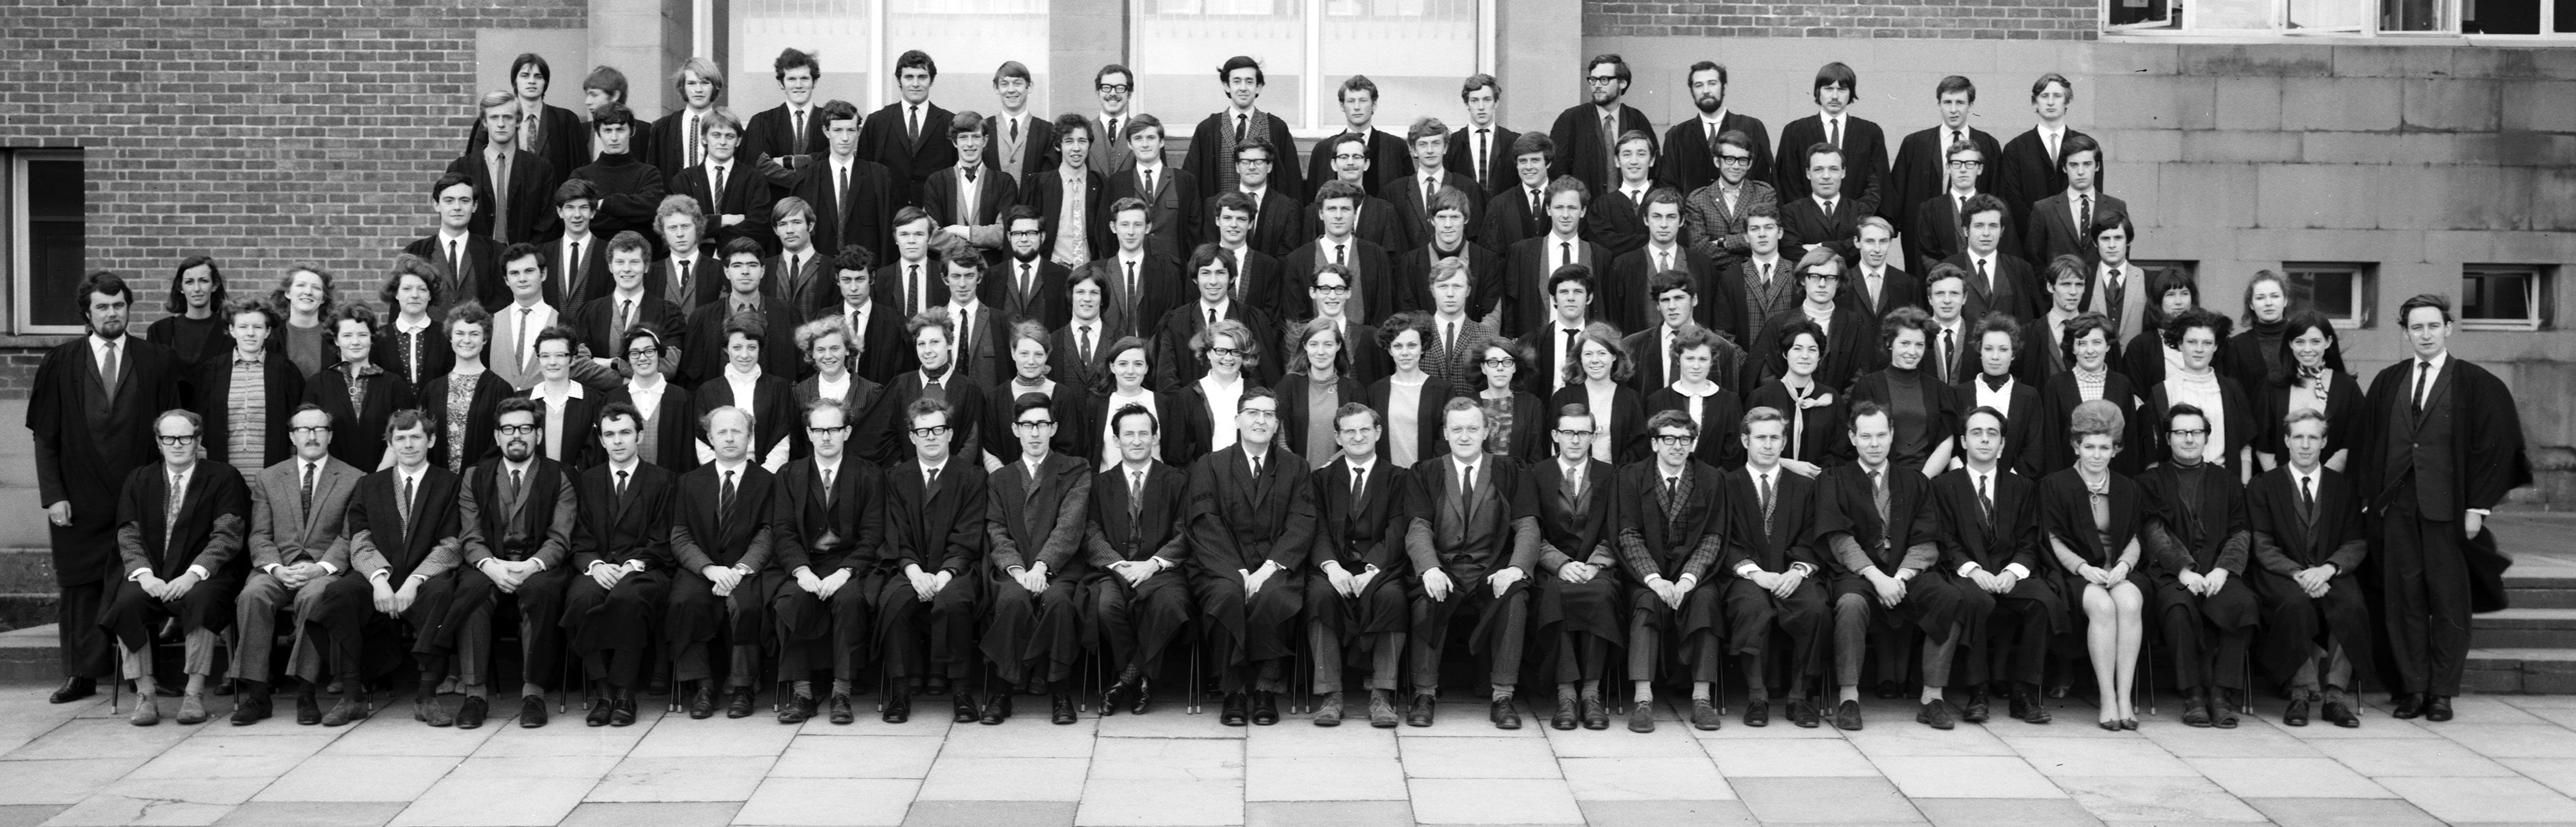 Geography Department Undergraduate Group photo from 1969